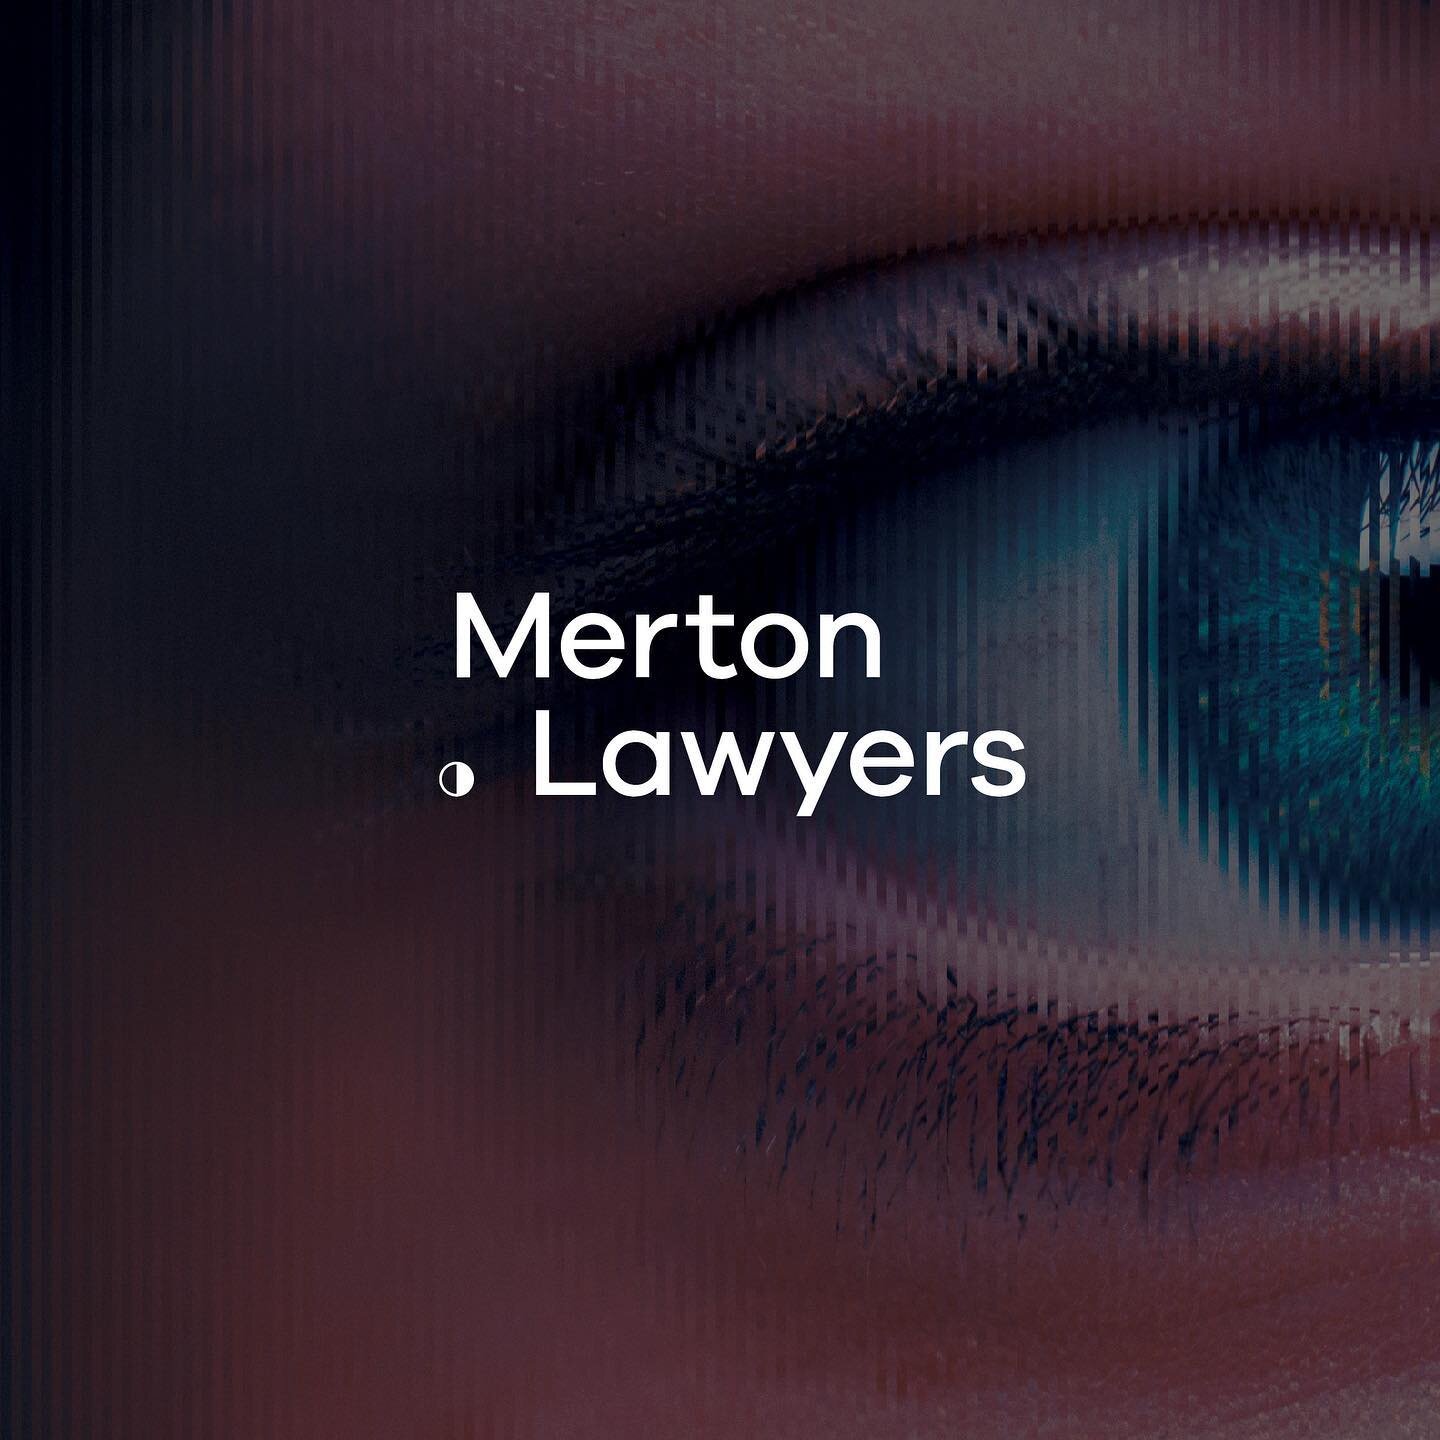 We are thrilled to launch our new brand, read more about how we are turning challenging times into an age of opportunity. 
mertonlawyers.com.au